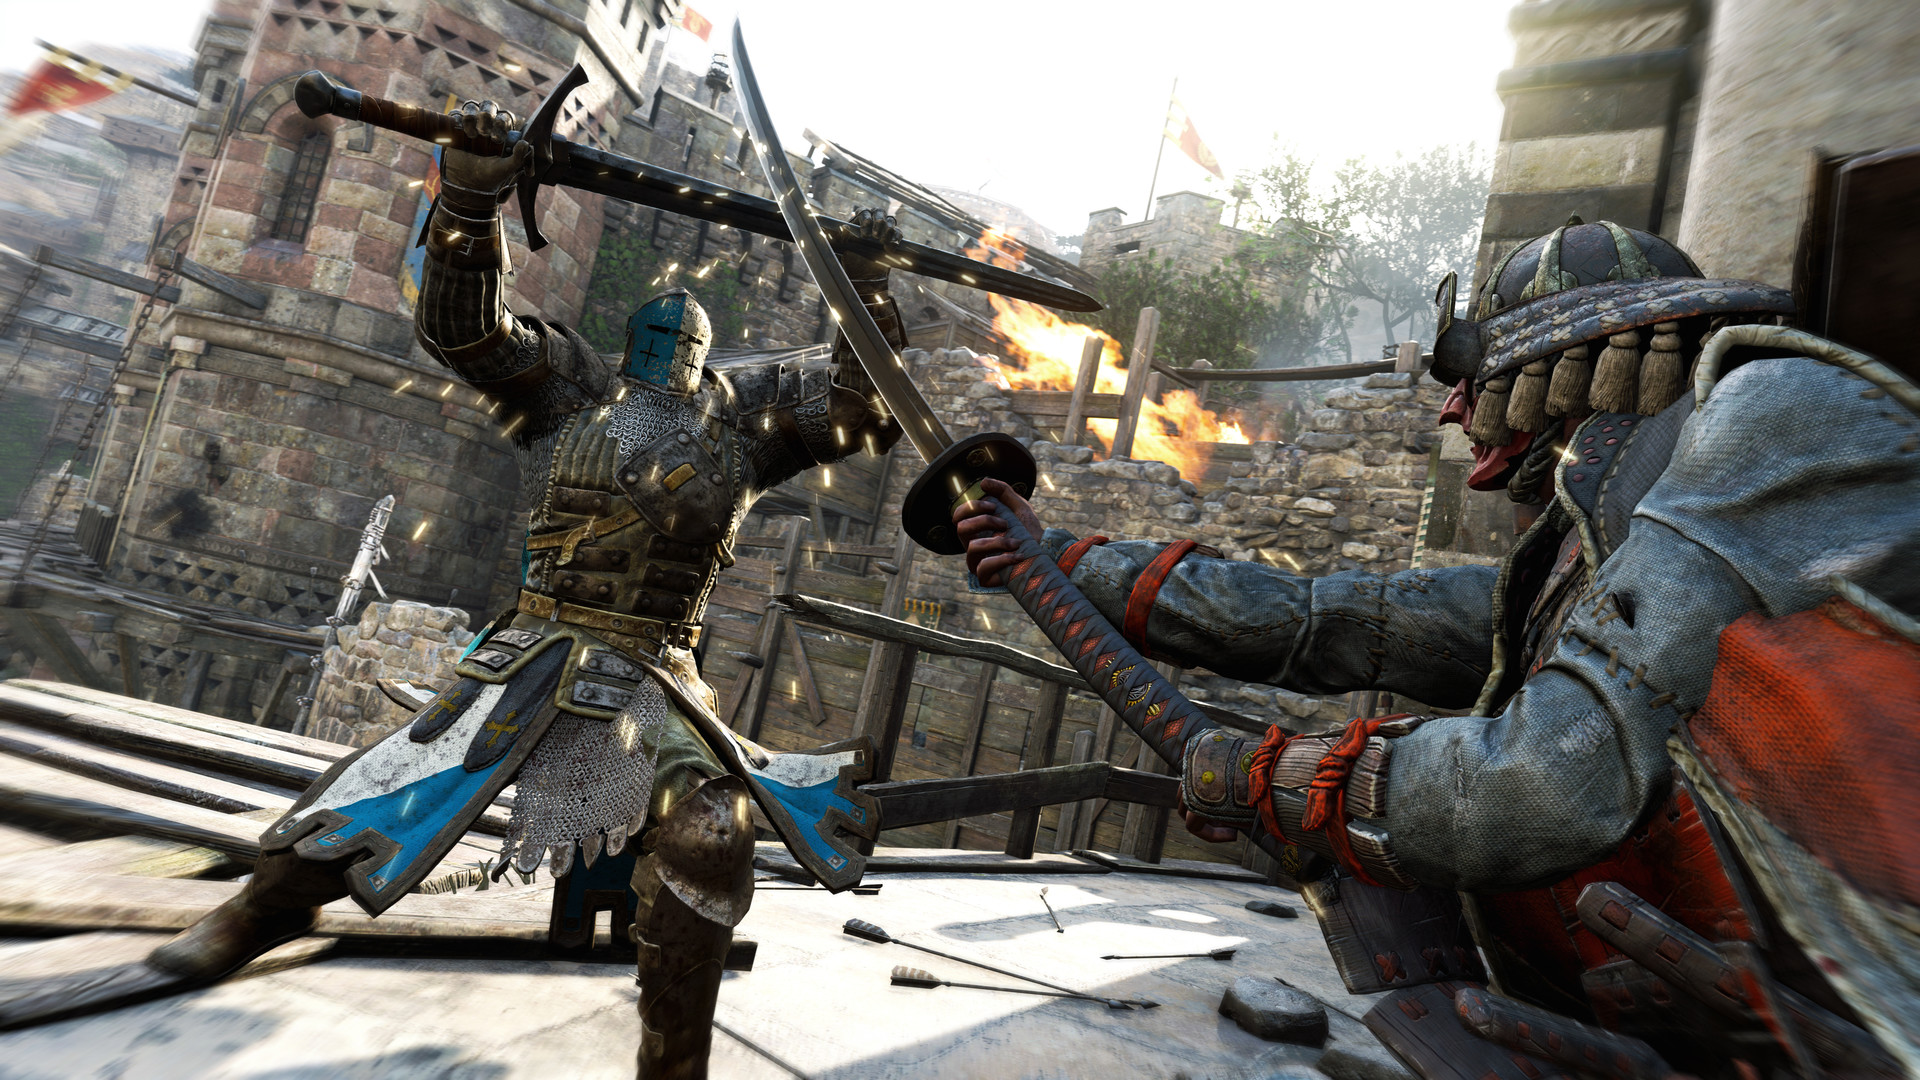 FOR HONOR™ on Steam